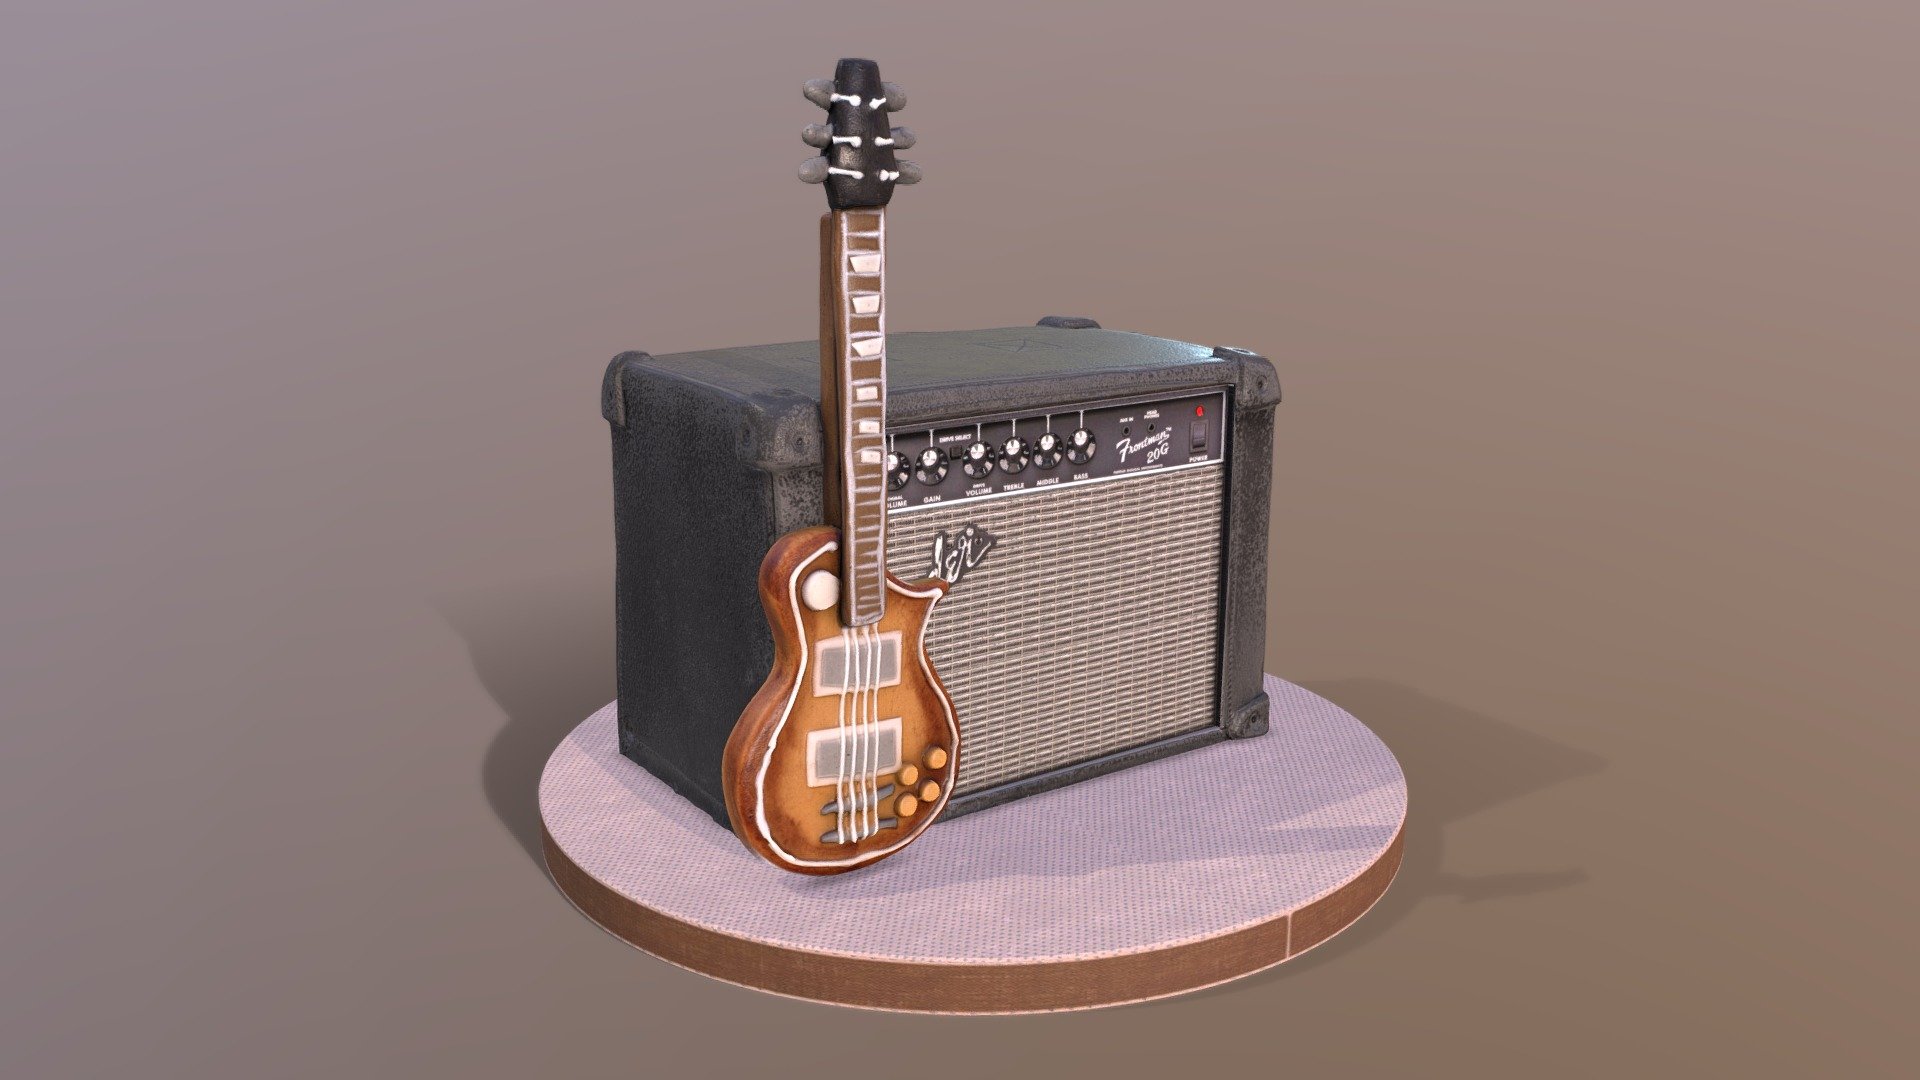 This legendery Fender Gutar Amplifier Musician Cake model was created using photogrammetry which is made by CAKESBURG Premium Cake Shop in the UK. You can purchase real cake from this link: https://cakesburg.co.uk/products/fender-guitar-amplifier-guitarist-cake-1?_pos=2&amp;_sid=dd9339c46&amp;_ss=r

Textures 2X 4096*4096px PBR photoscan-based materials Base Color, Normal Map, Roughness) - Guitar and Amplifier Musician Cake - Buy Royalty Free 3D model by Cakesburg Premium 3D Cake Shop (@Viscom_Cakesburg) 3d model